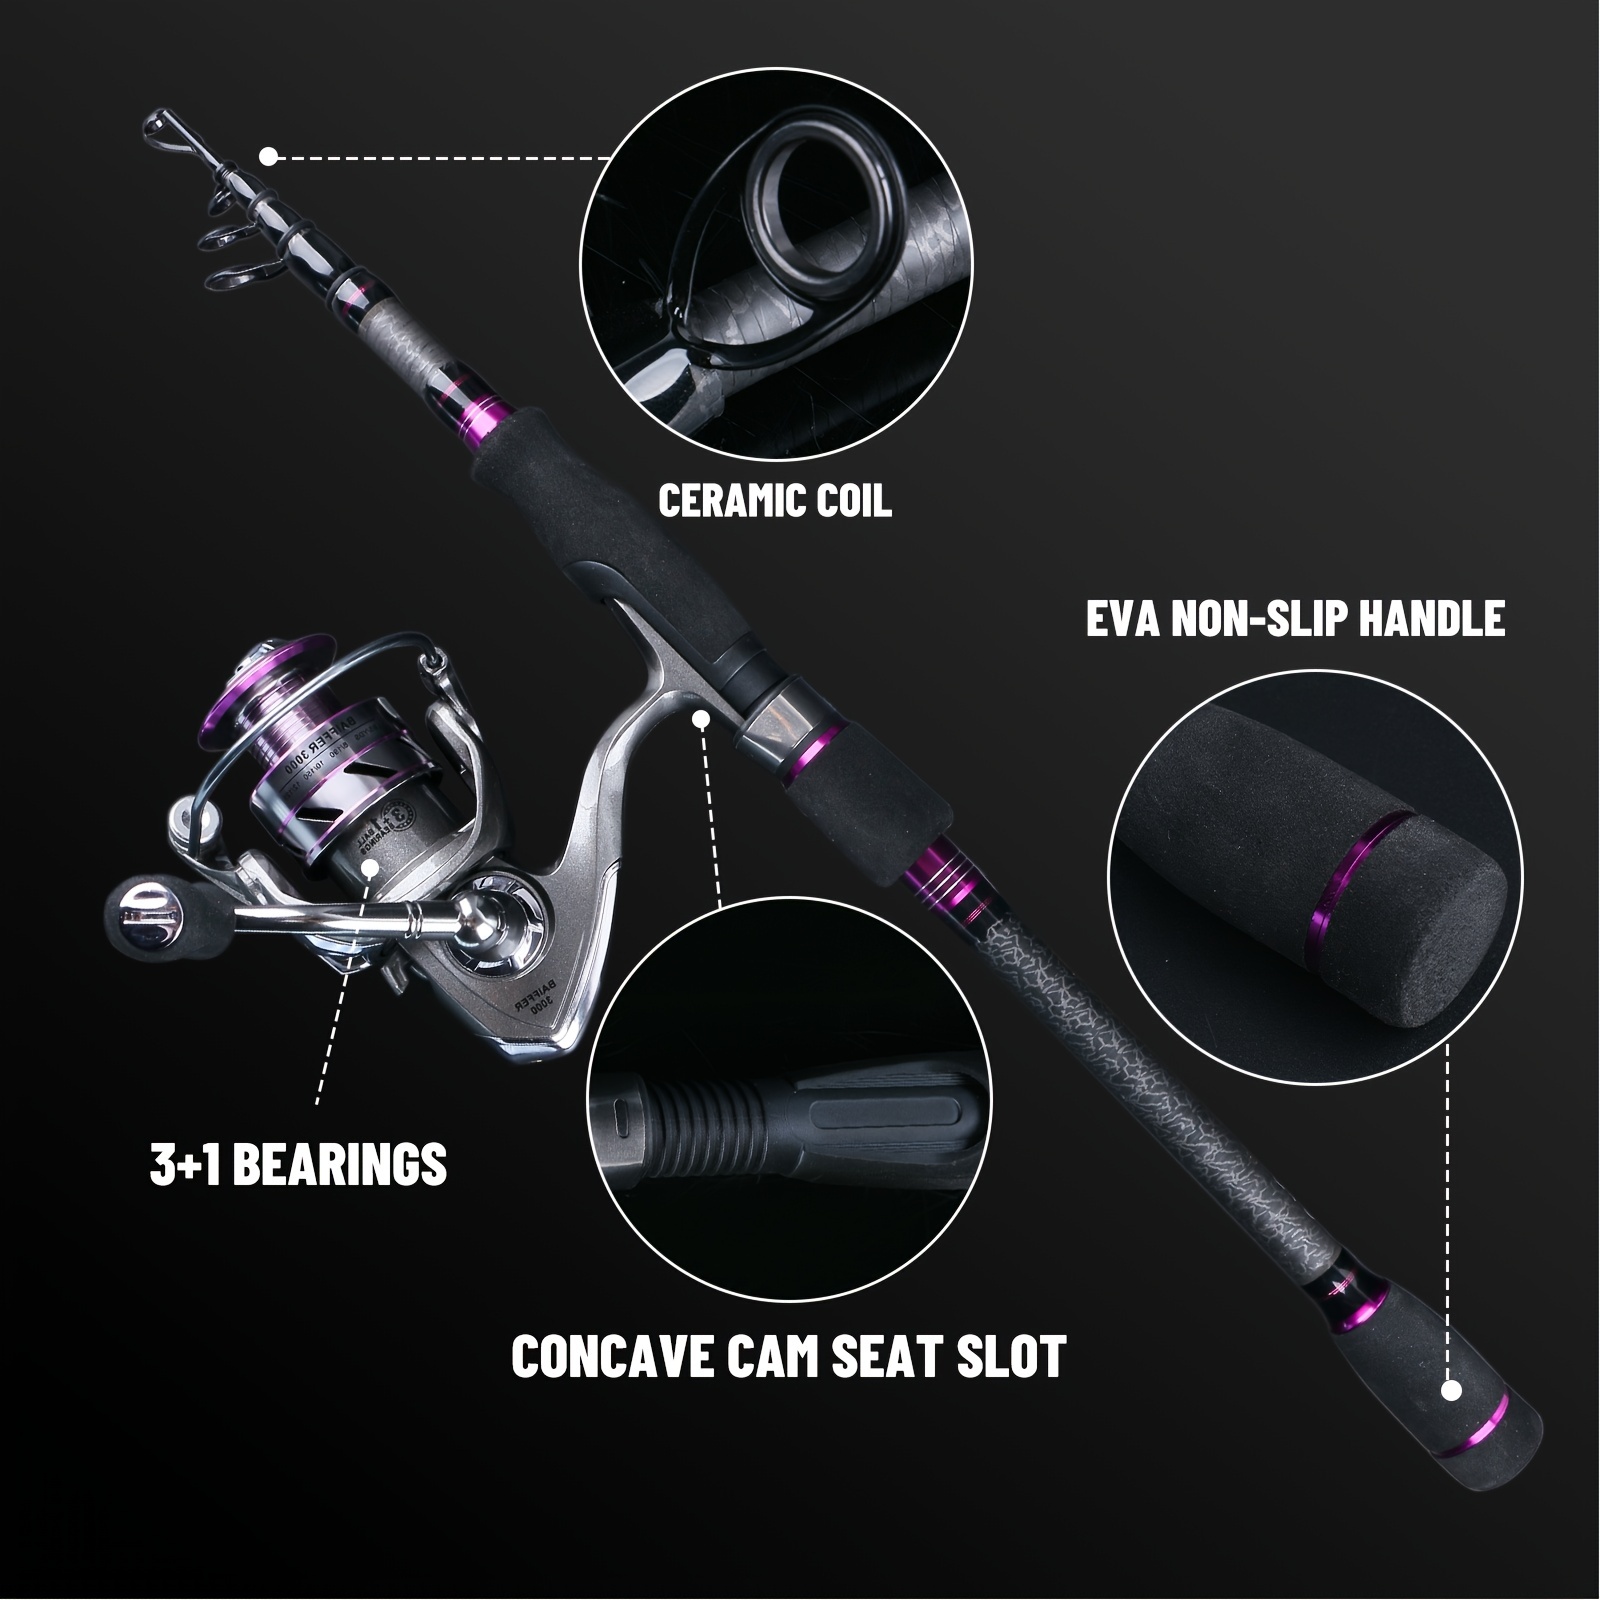 Hiumi Fishing Rod and Reel Combos Carbon Fiber Telescopic Fishing Rod with  Re 海外 即決 - スキル、知識